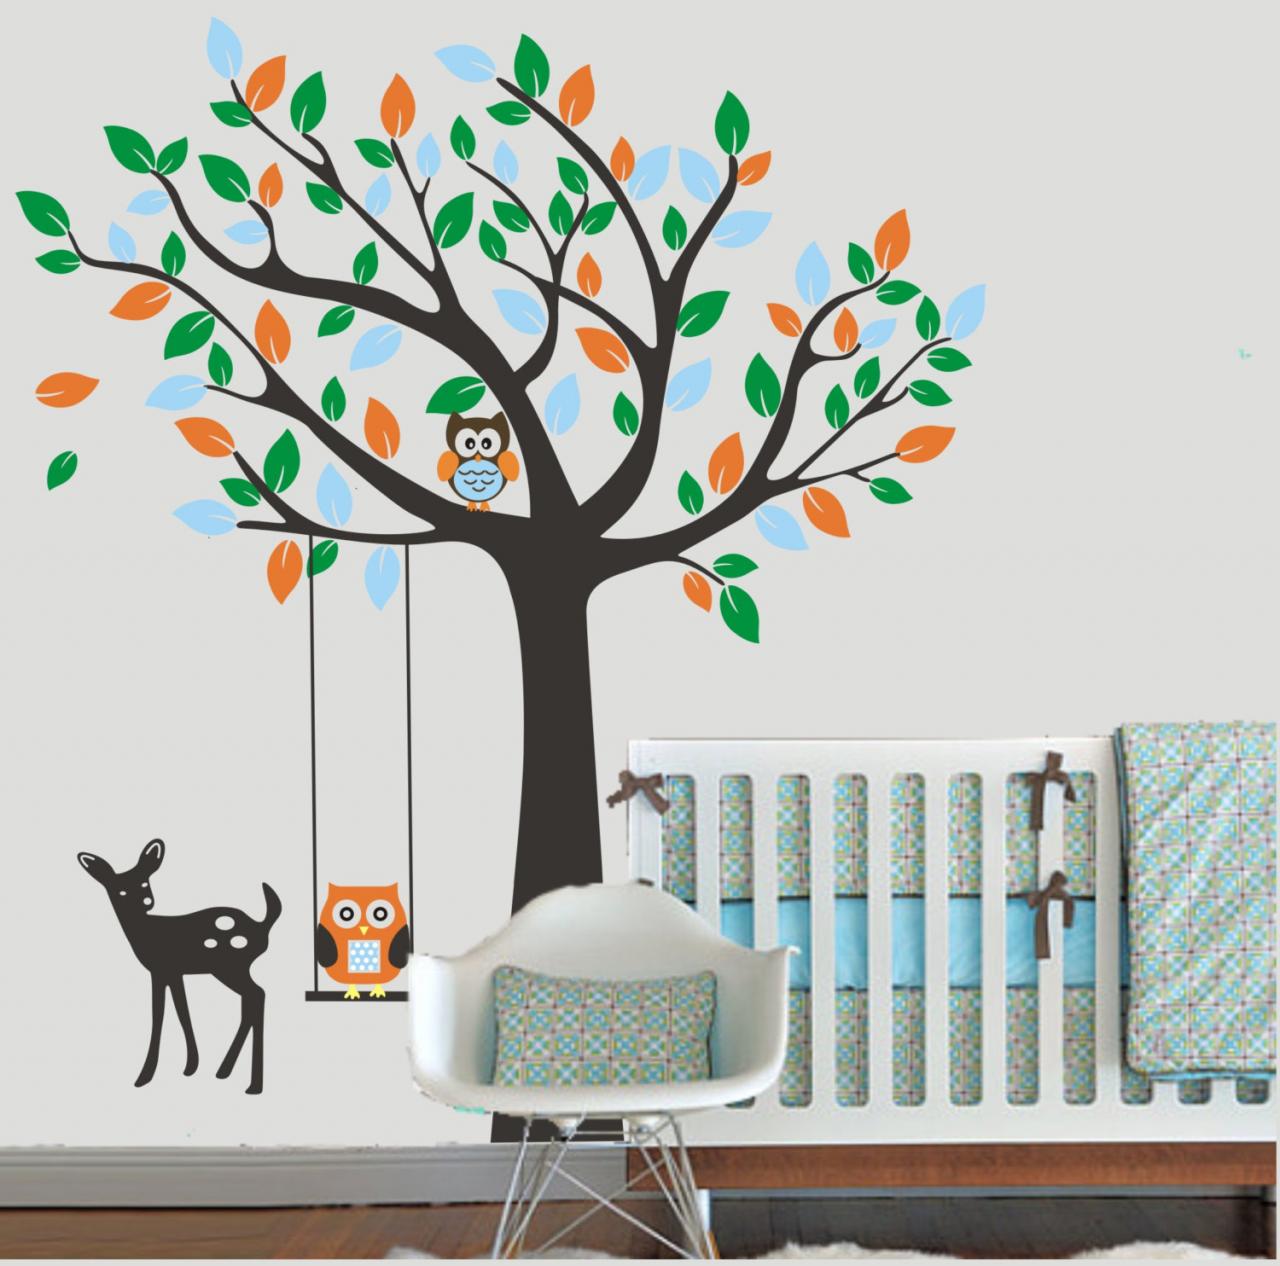 Vinyl Wall Decal Cute Swing Owl On Colorful Tree Fawn Bird Owls Birds Home House Art Wall Decals Wall Sticker Stickers Baby Room Kid R832